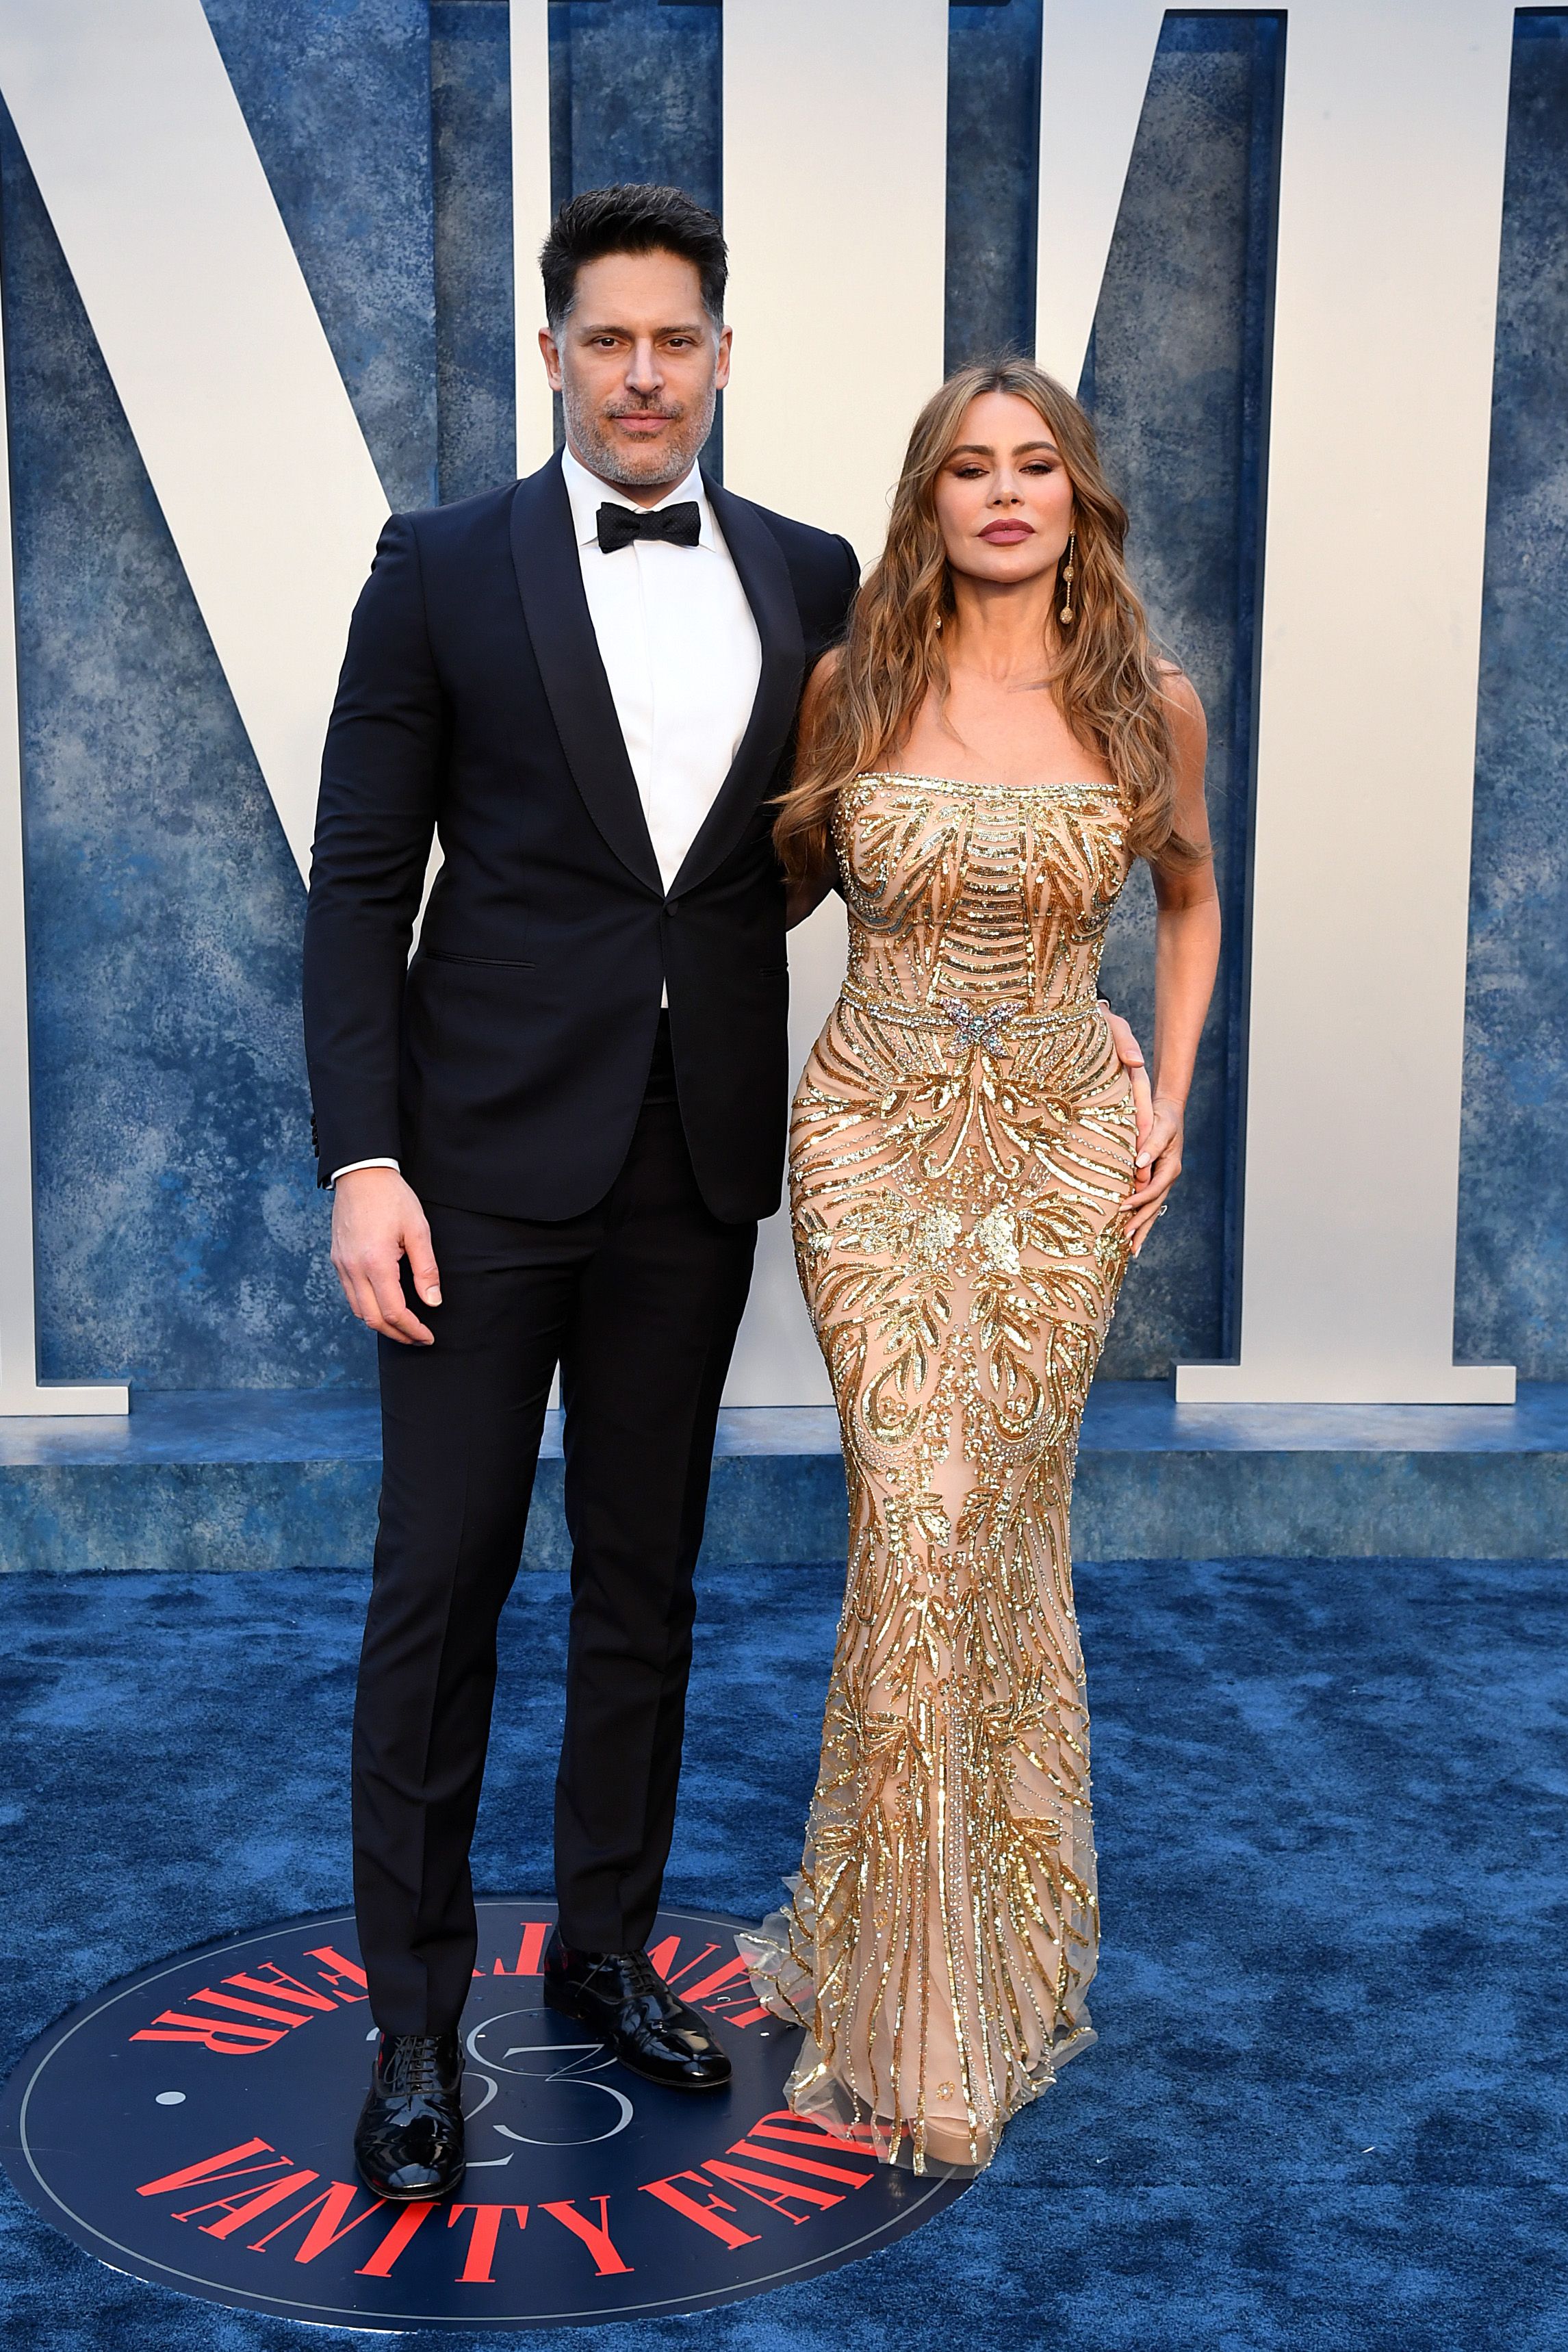 Sofia Vergara Doesn't Like the Outfit Her Husband Picked for Her: Photo  3796906, Sofia Vergara Photos